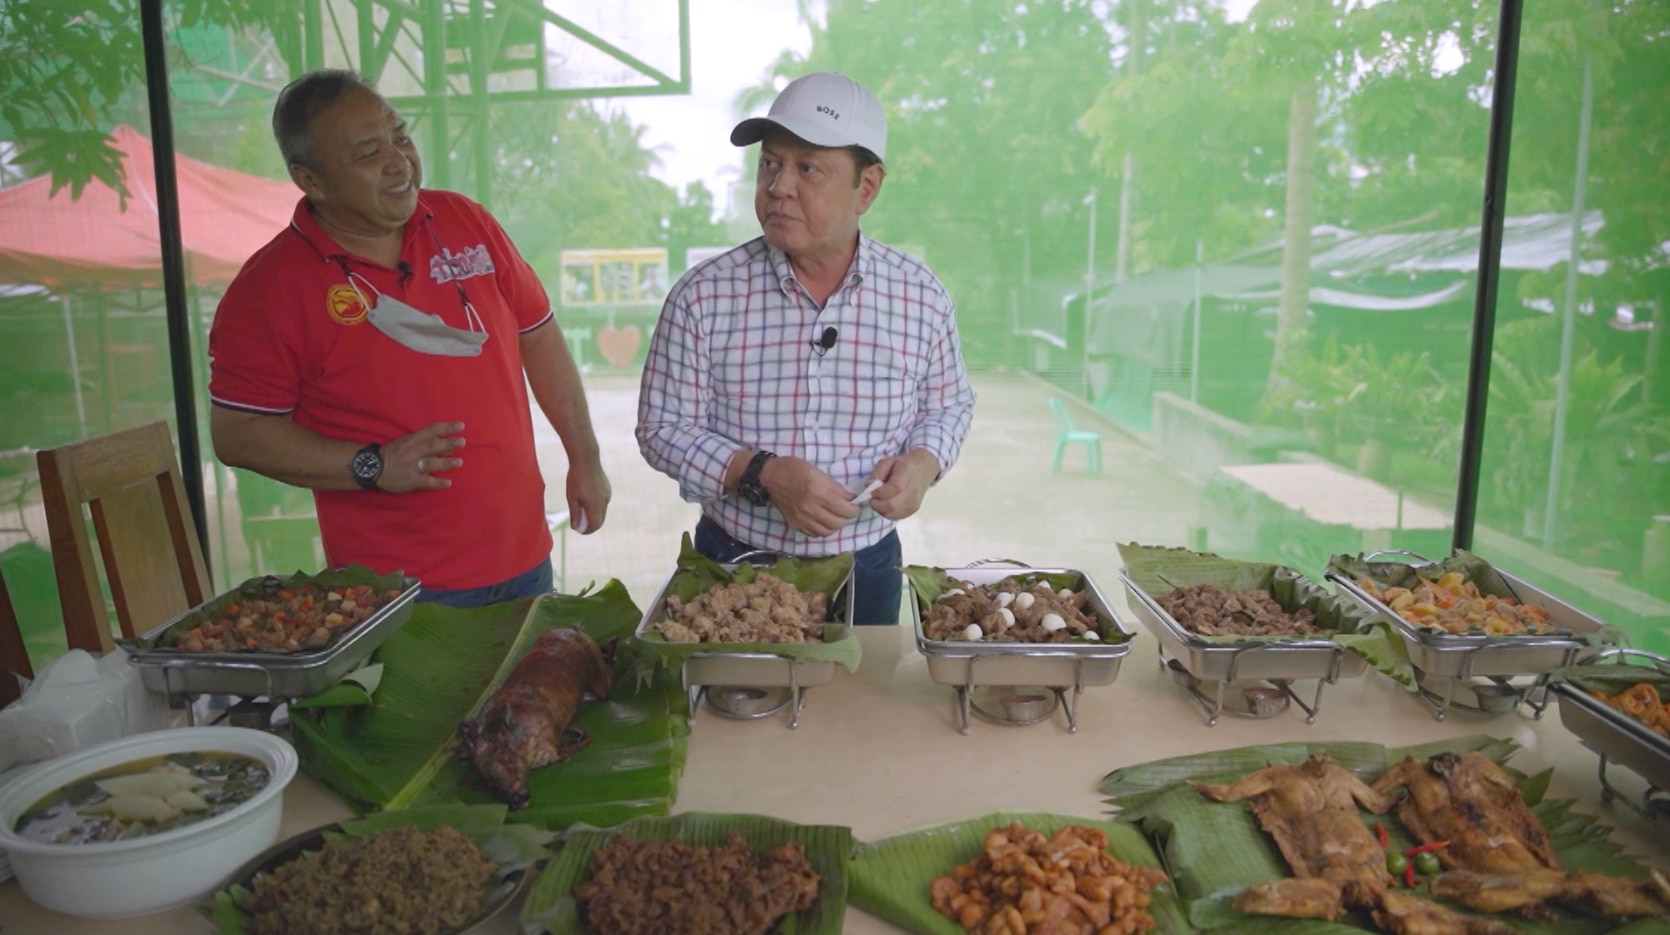 Noli de Castro features Pinoy dishes using rabbit's meat in 